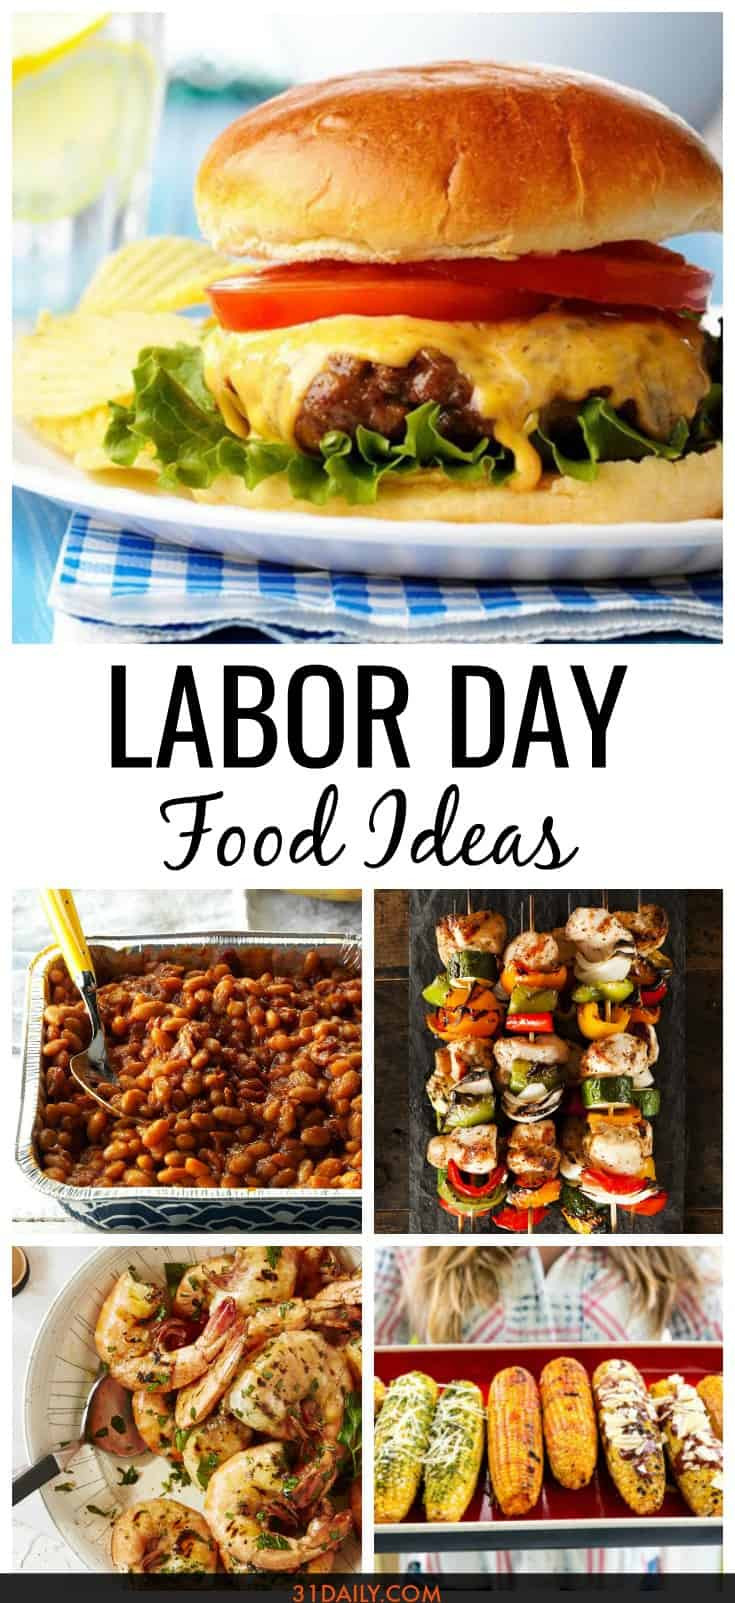 Labor Day Food Ideas
 End of Summer Labor Day Food Ideas 31 Daily